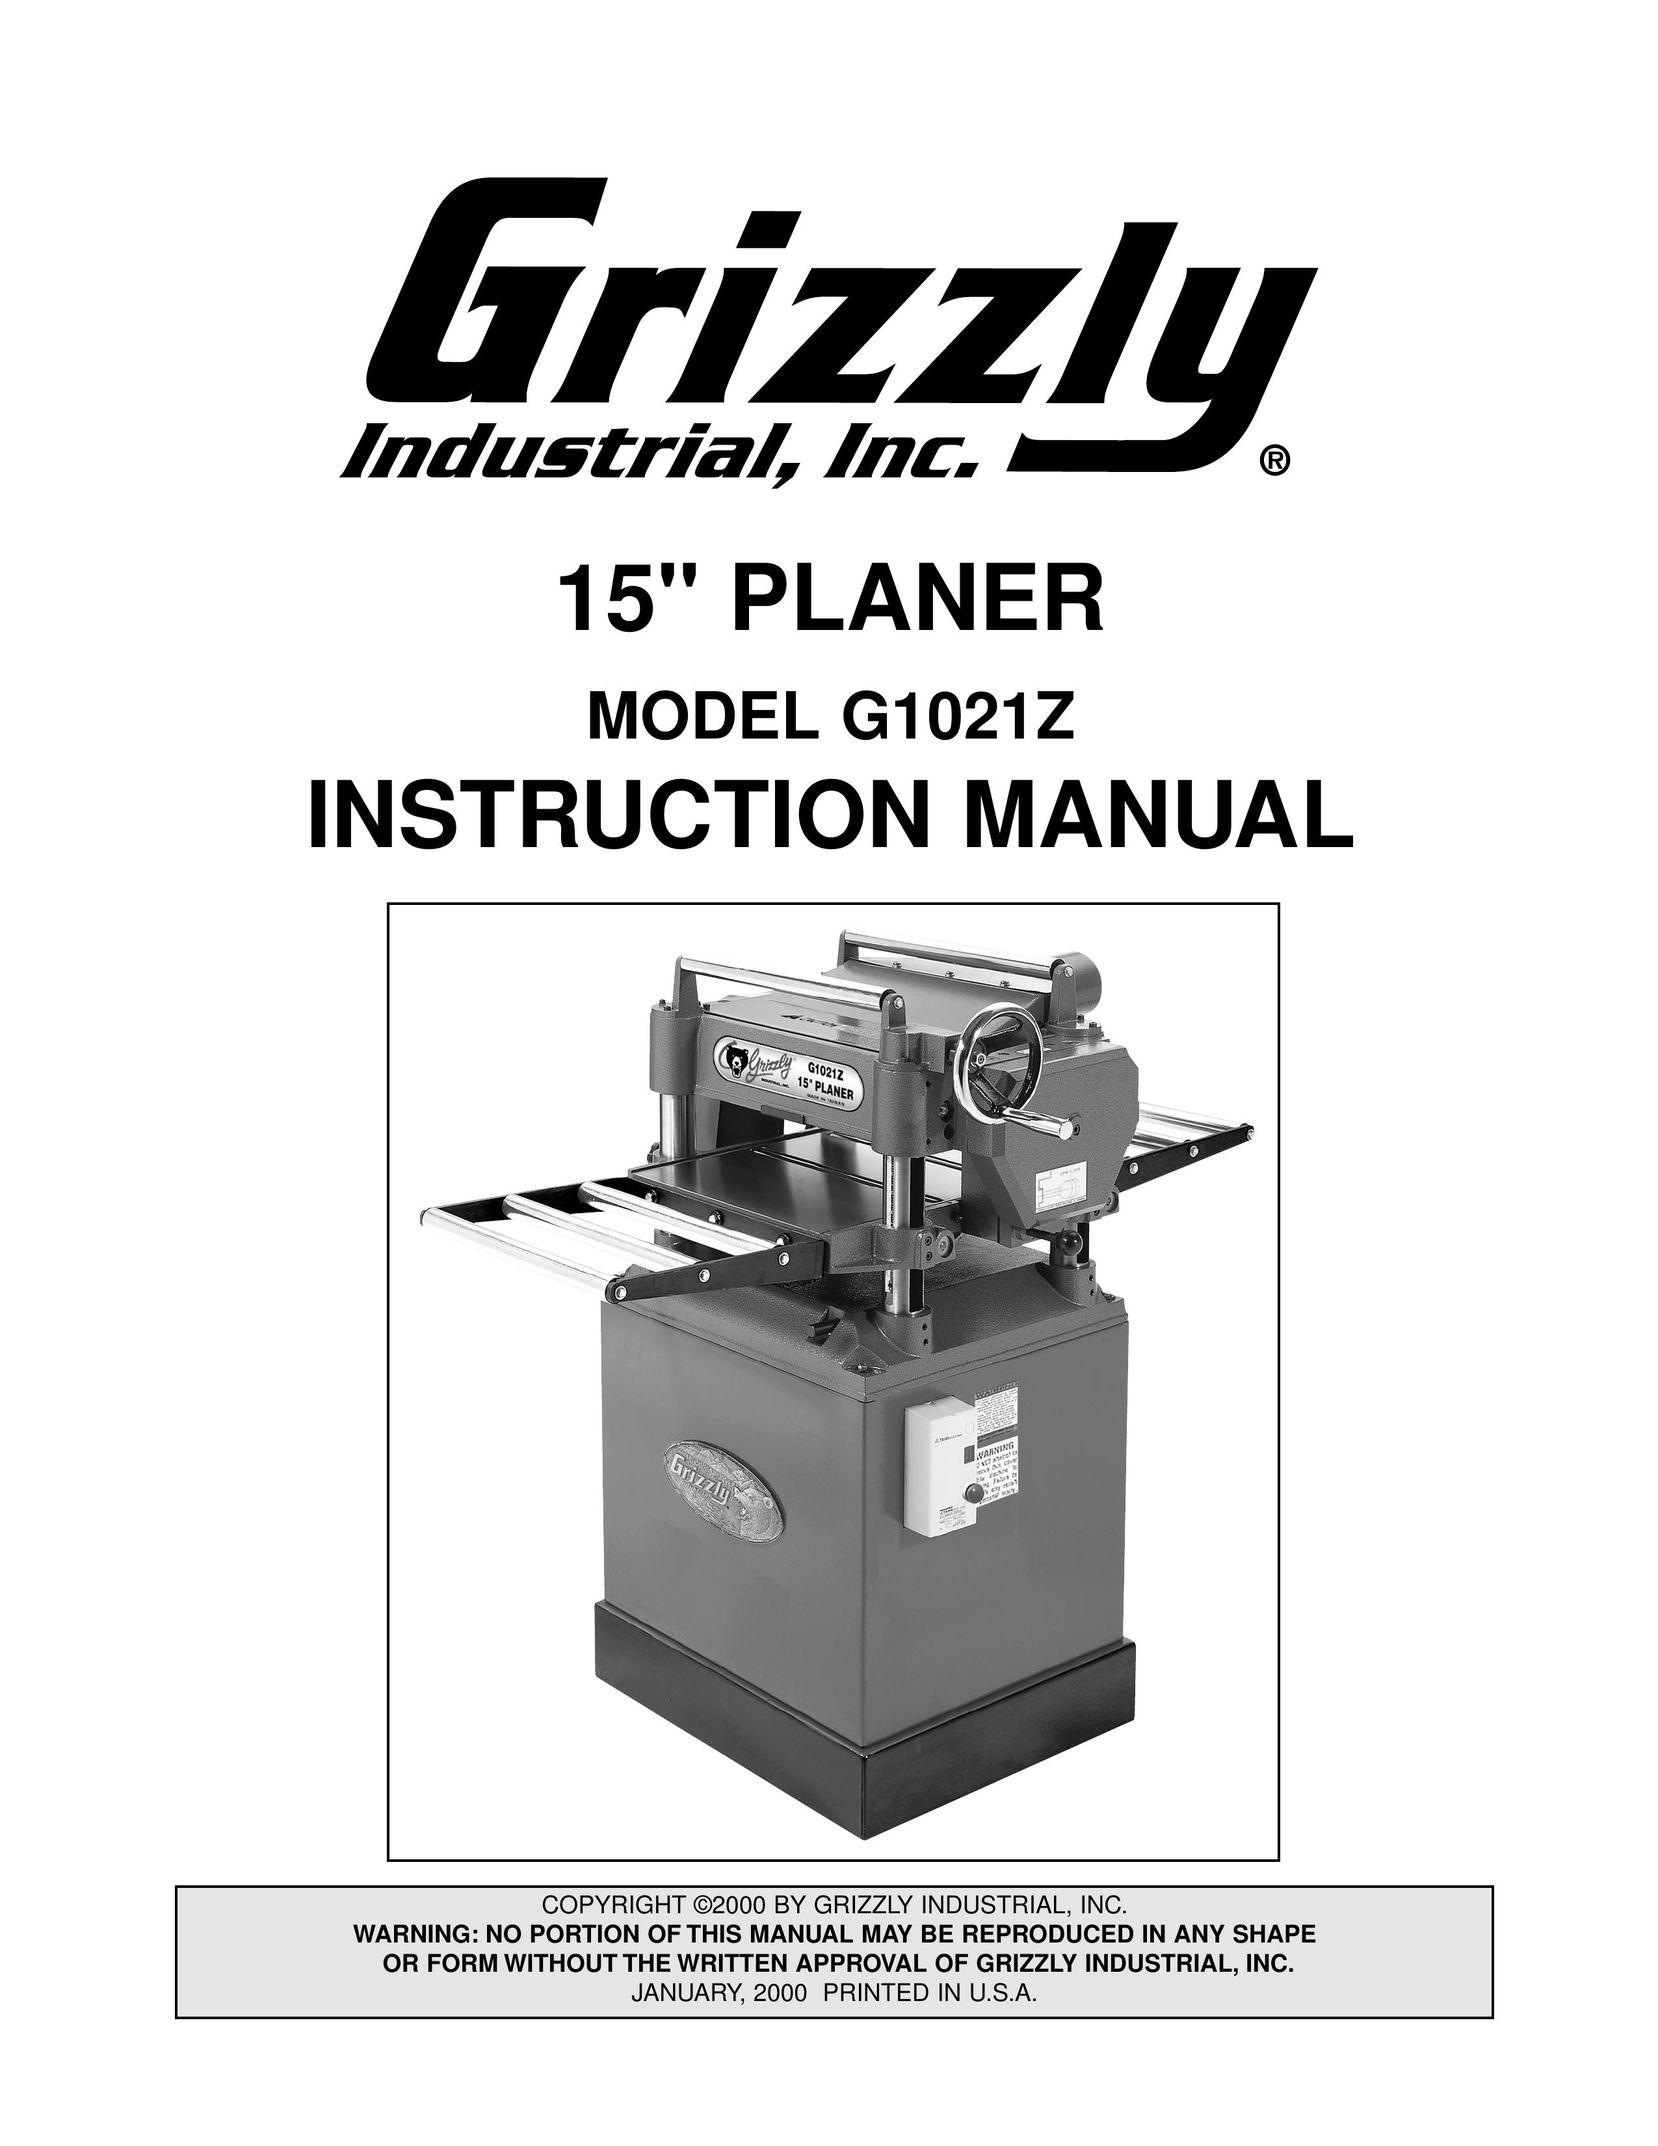 Grizzly G1021Z Planer User Manual